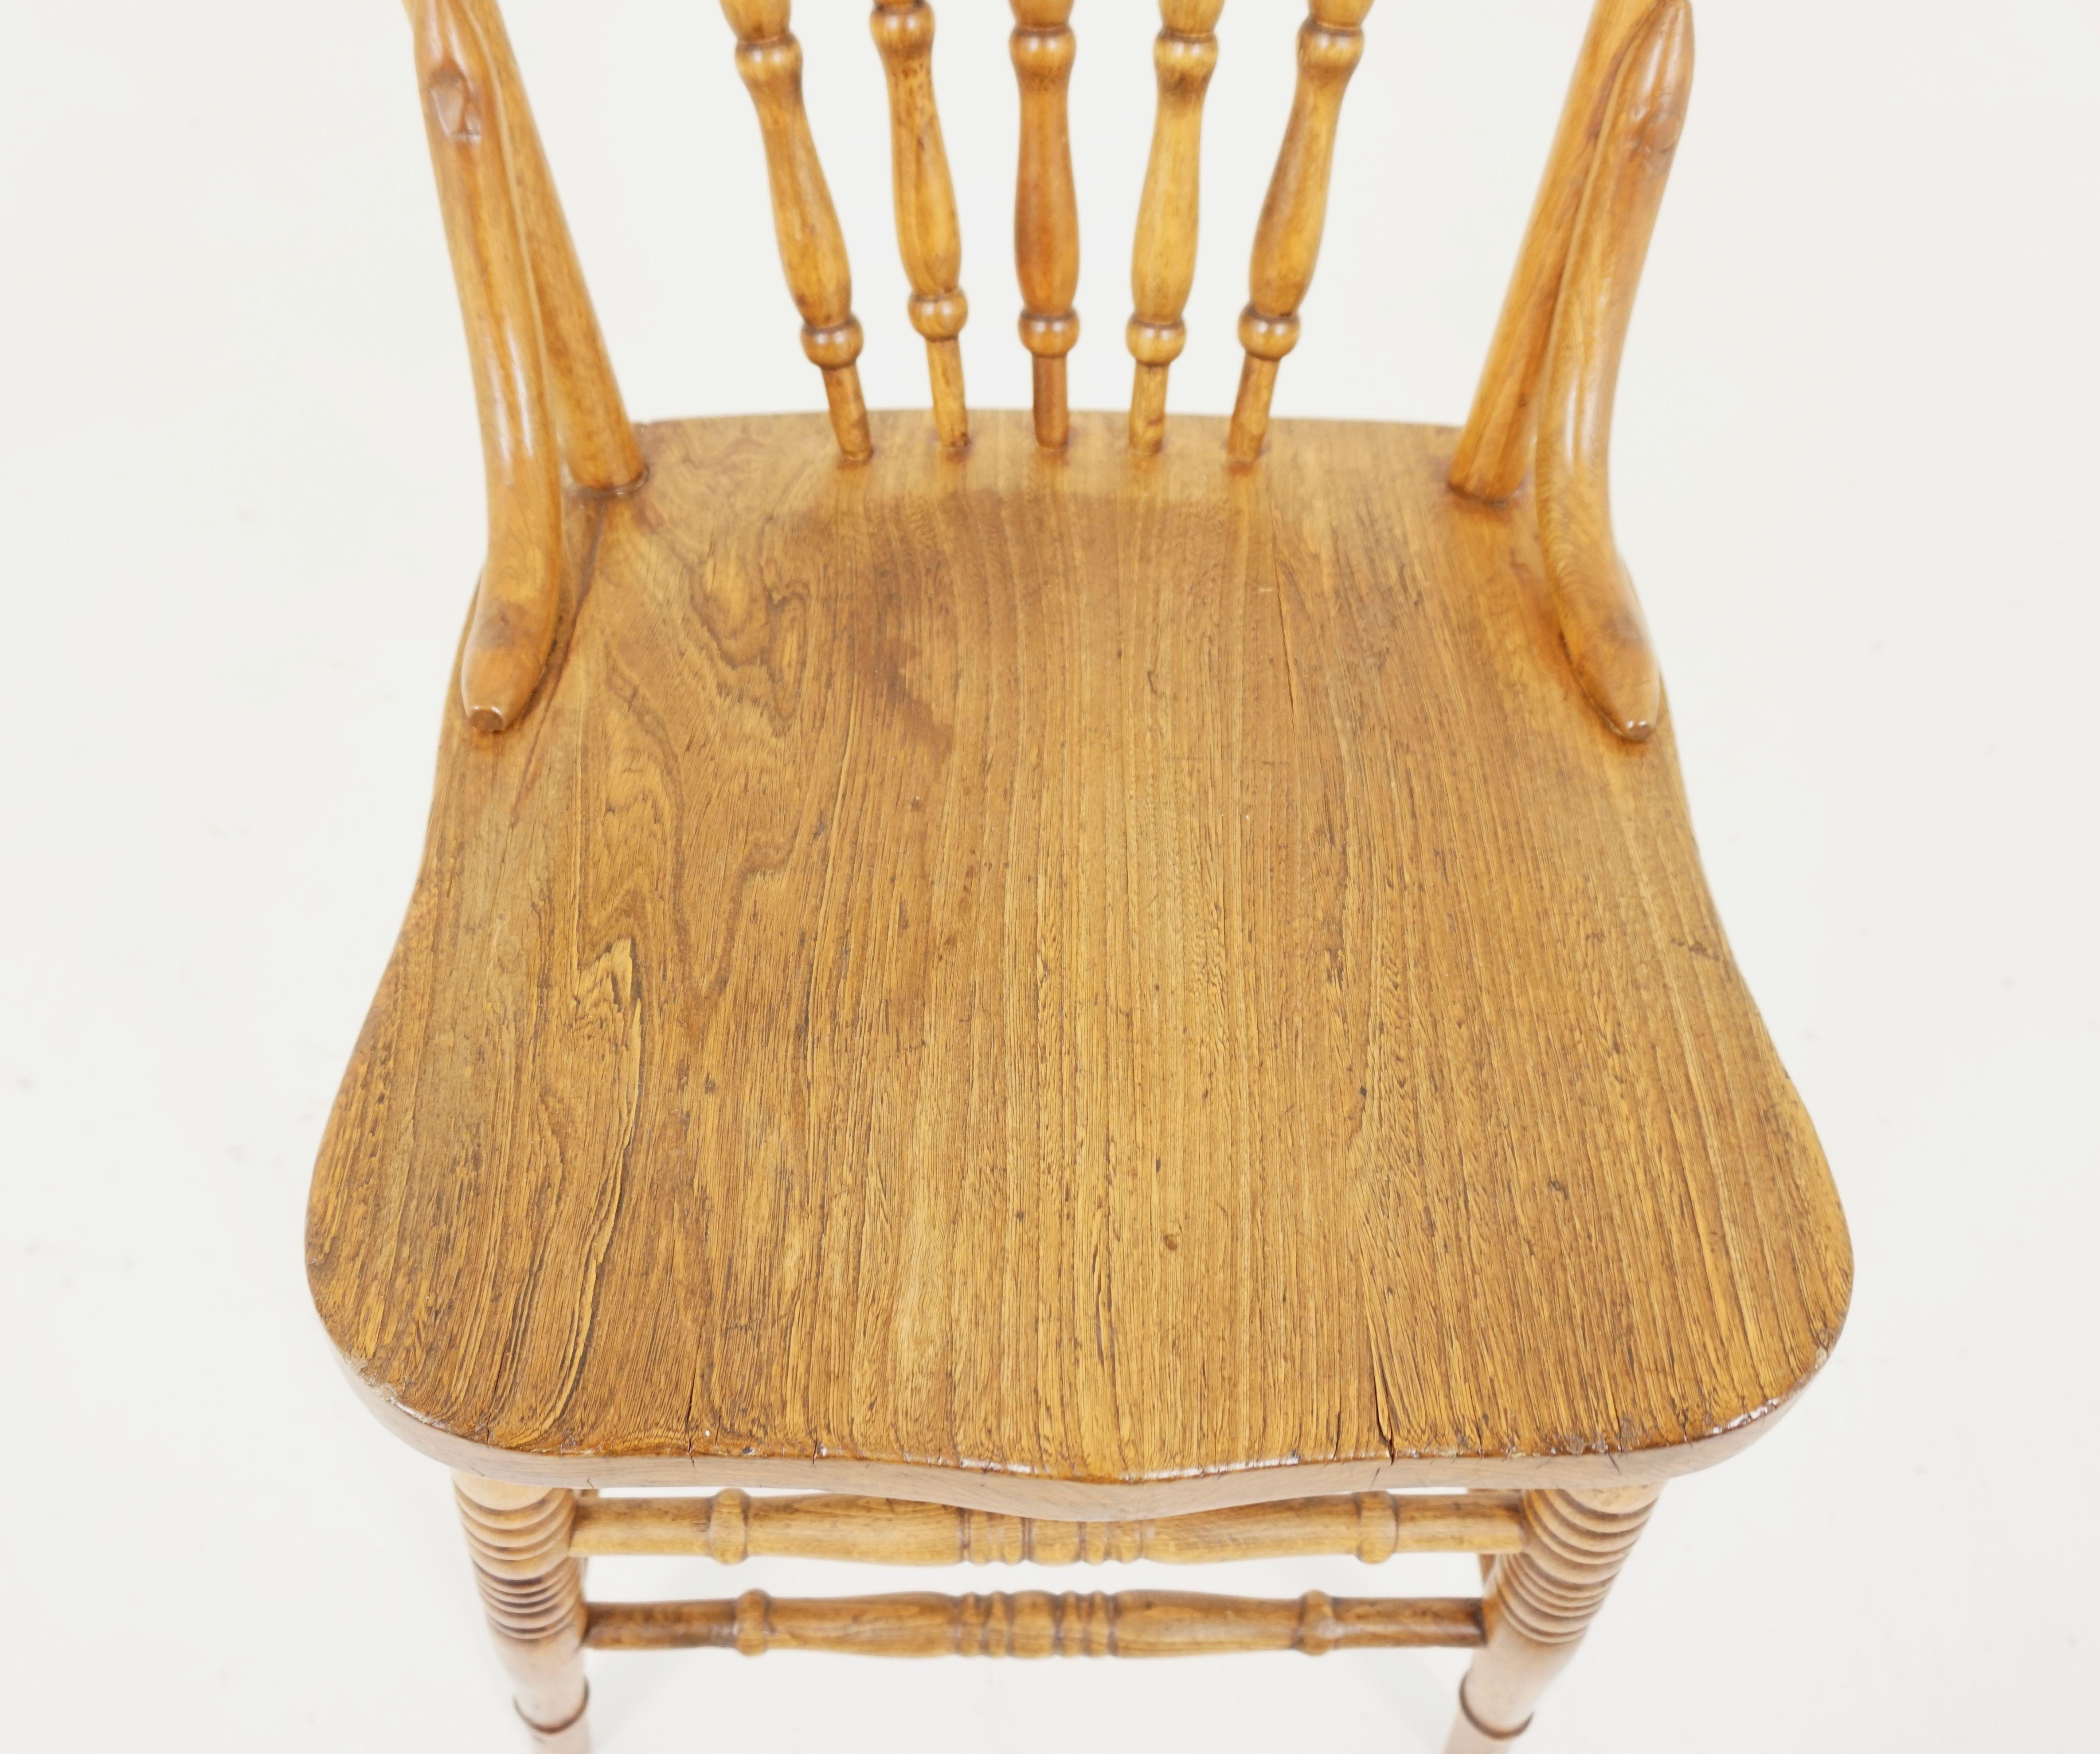 Early 20th Century Antique Chairs, Set of 5, Ash Presstack Chairs, Solid Seats, American 1900 B2066